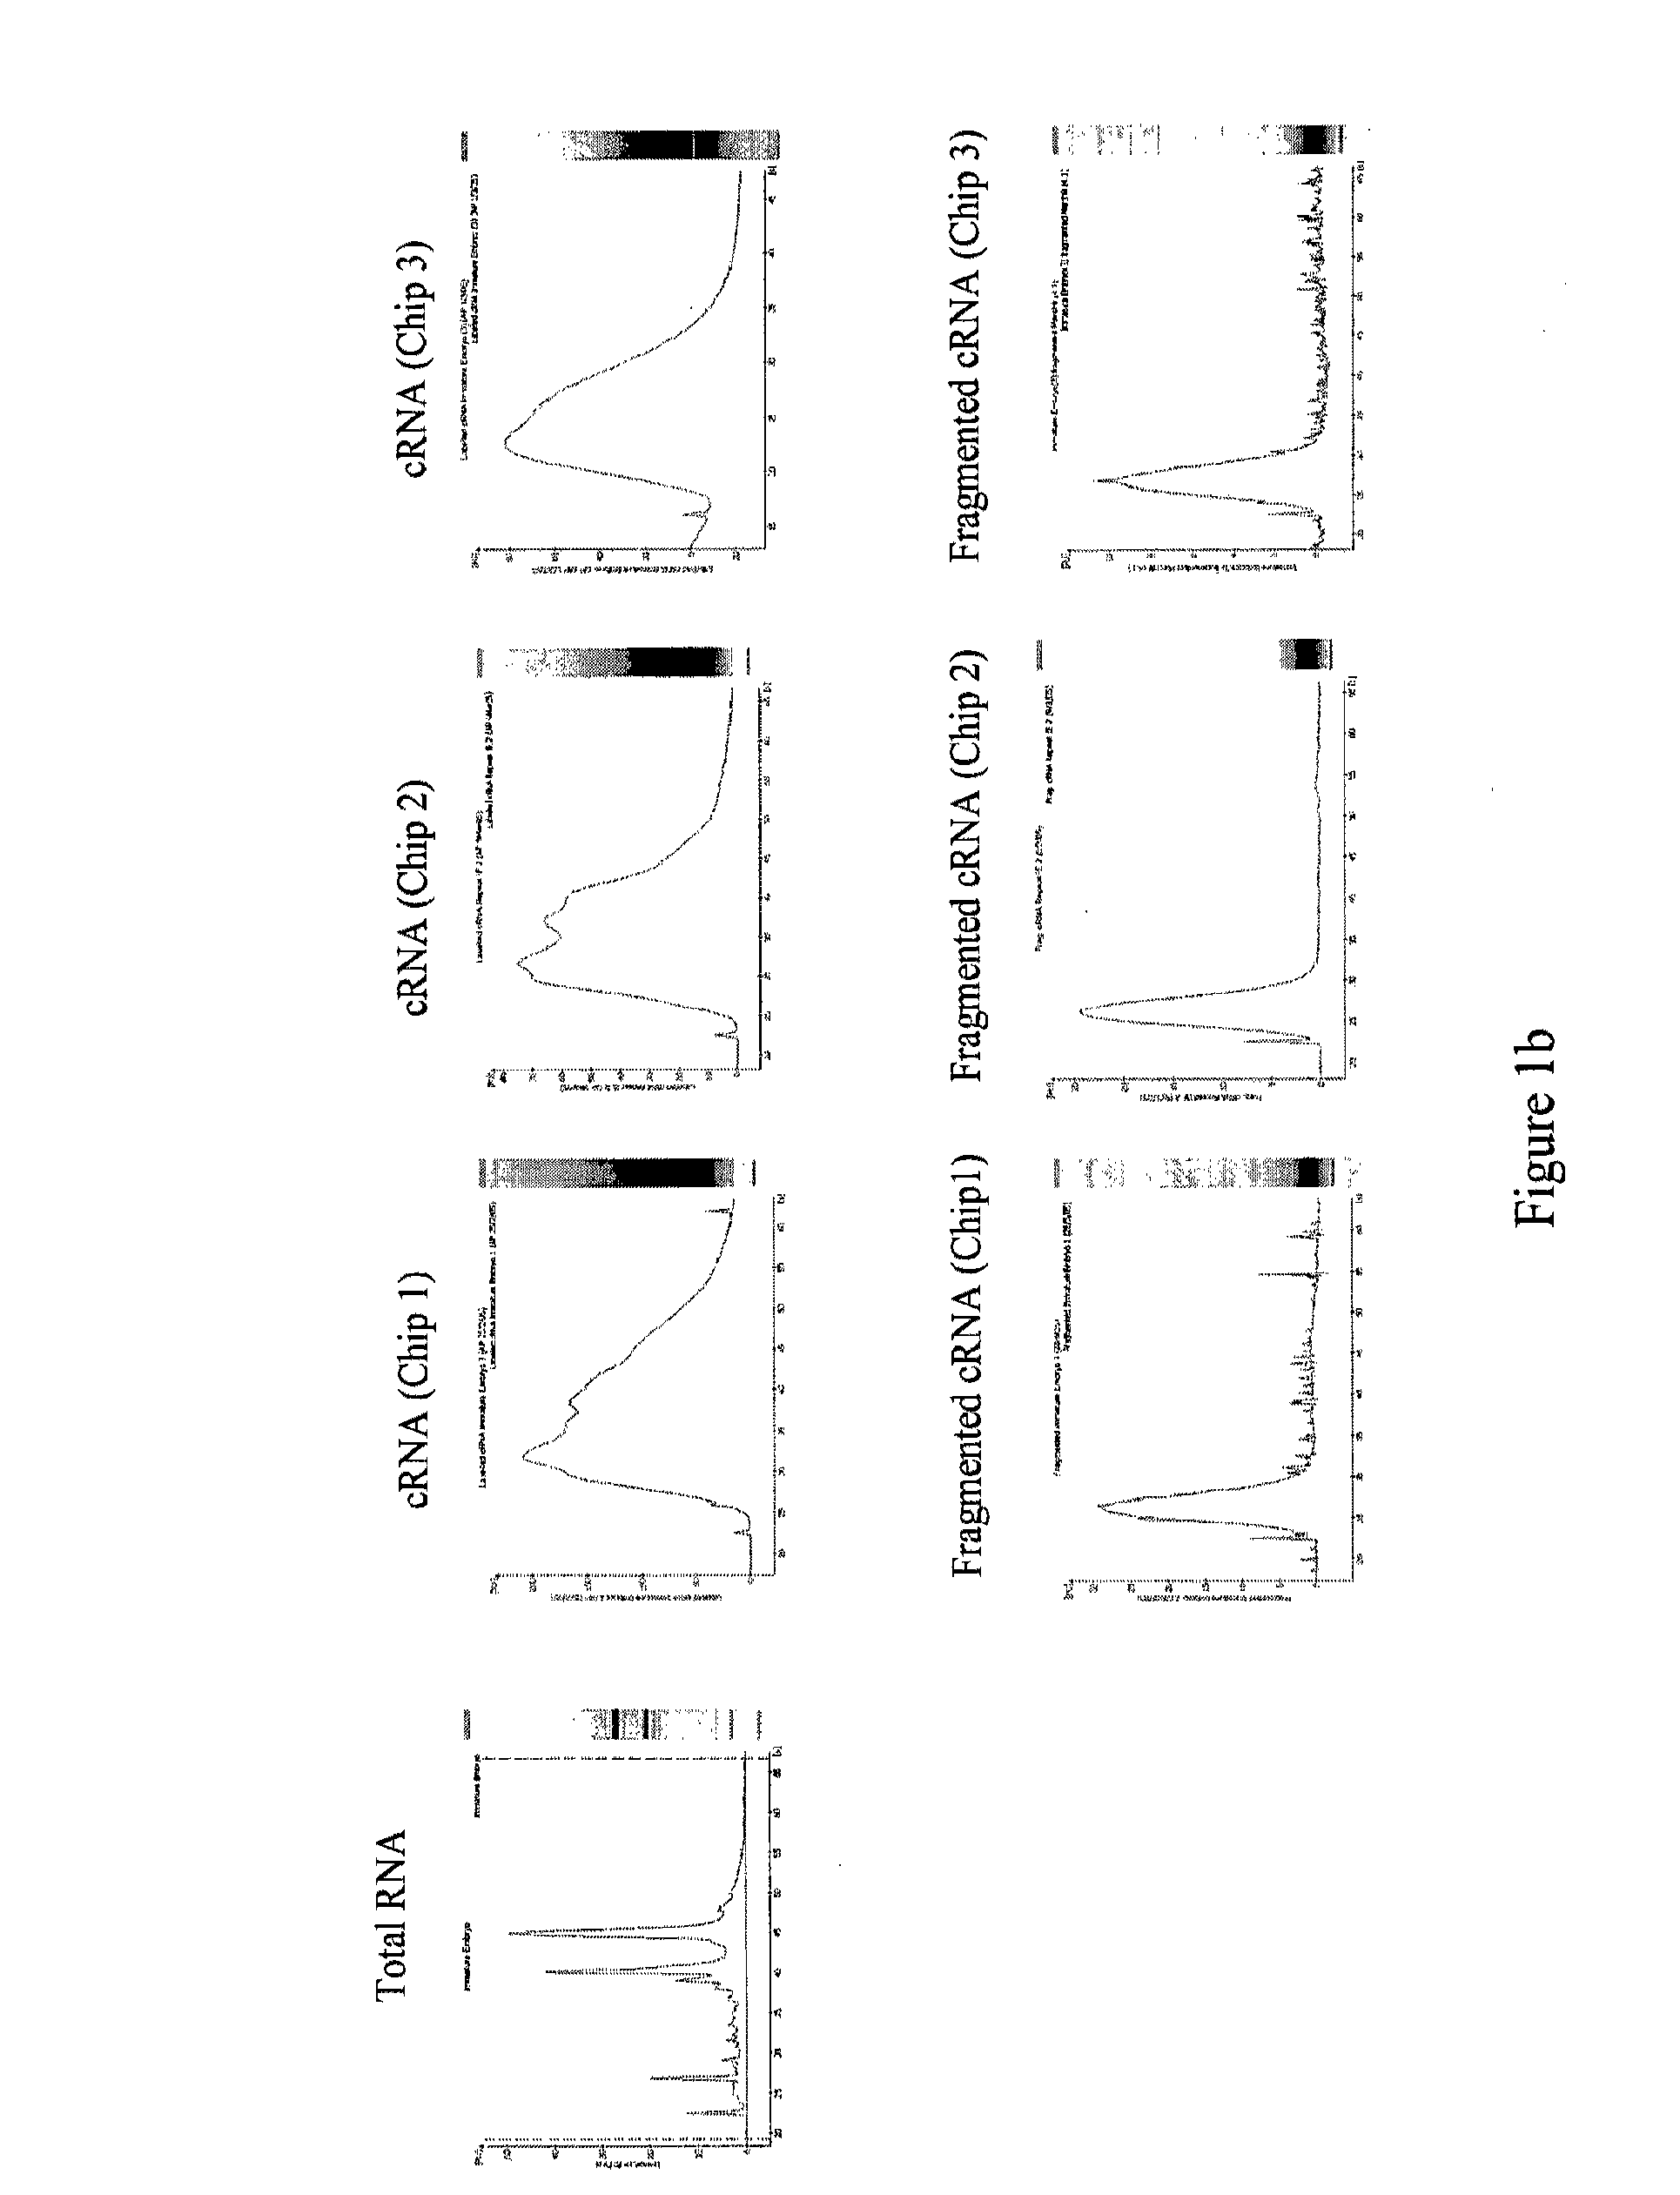 Plant Promoter Operable in Basal Endosperm Transfer Layer of Endosperm and Uses Thereof